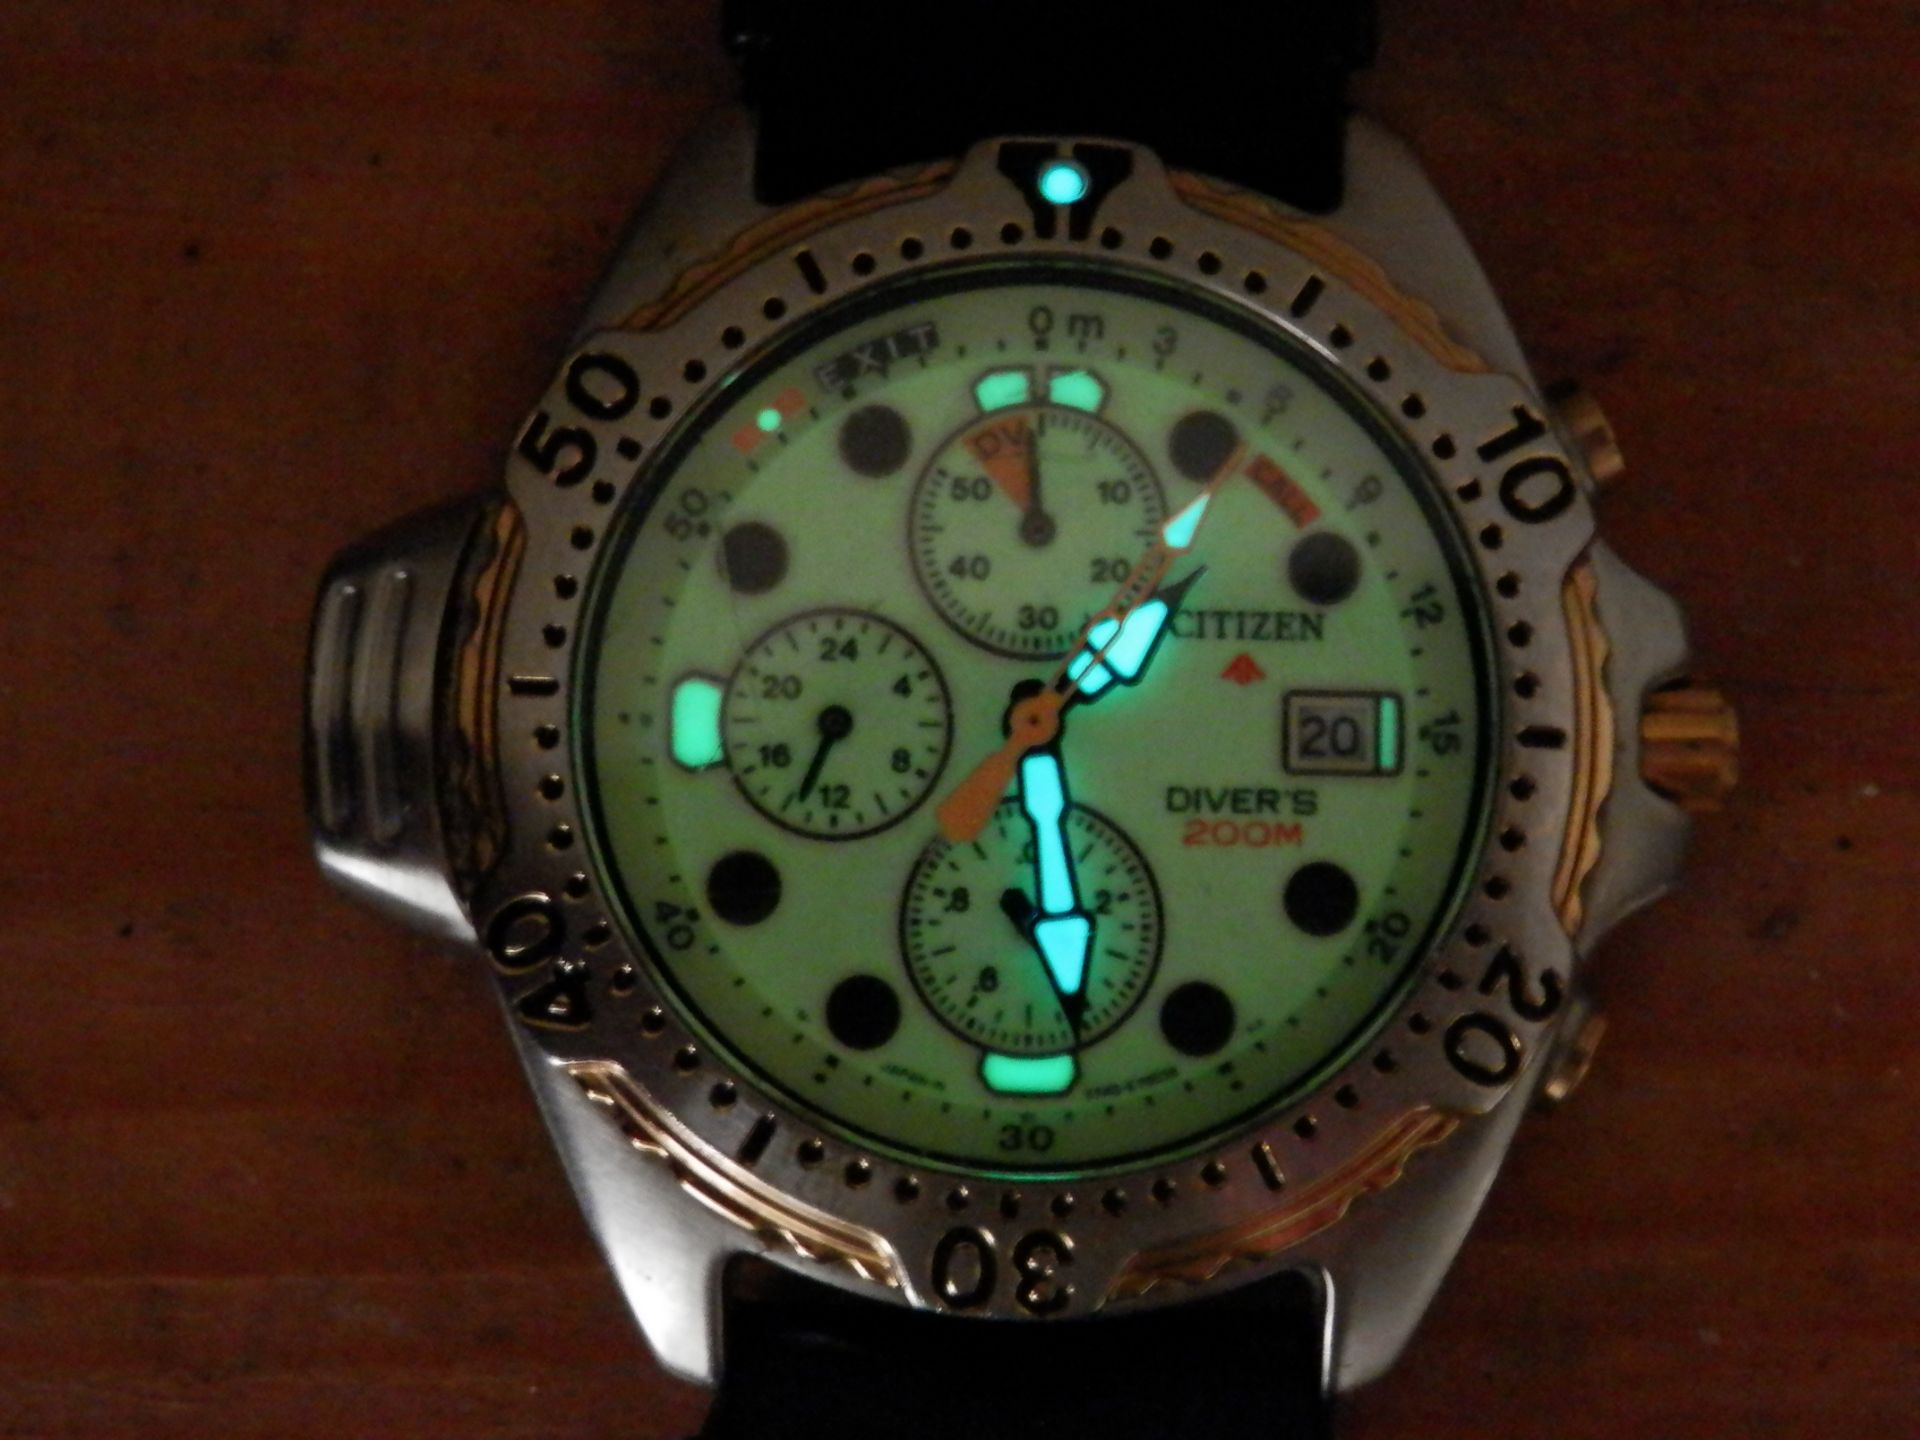 RARE GENTS CITIZEN PROMASTER LUME 3740 DEPTH METER STAINLESS RETRO DATE WATCH - Image 3 of 12